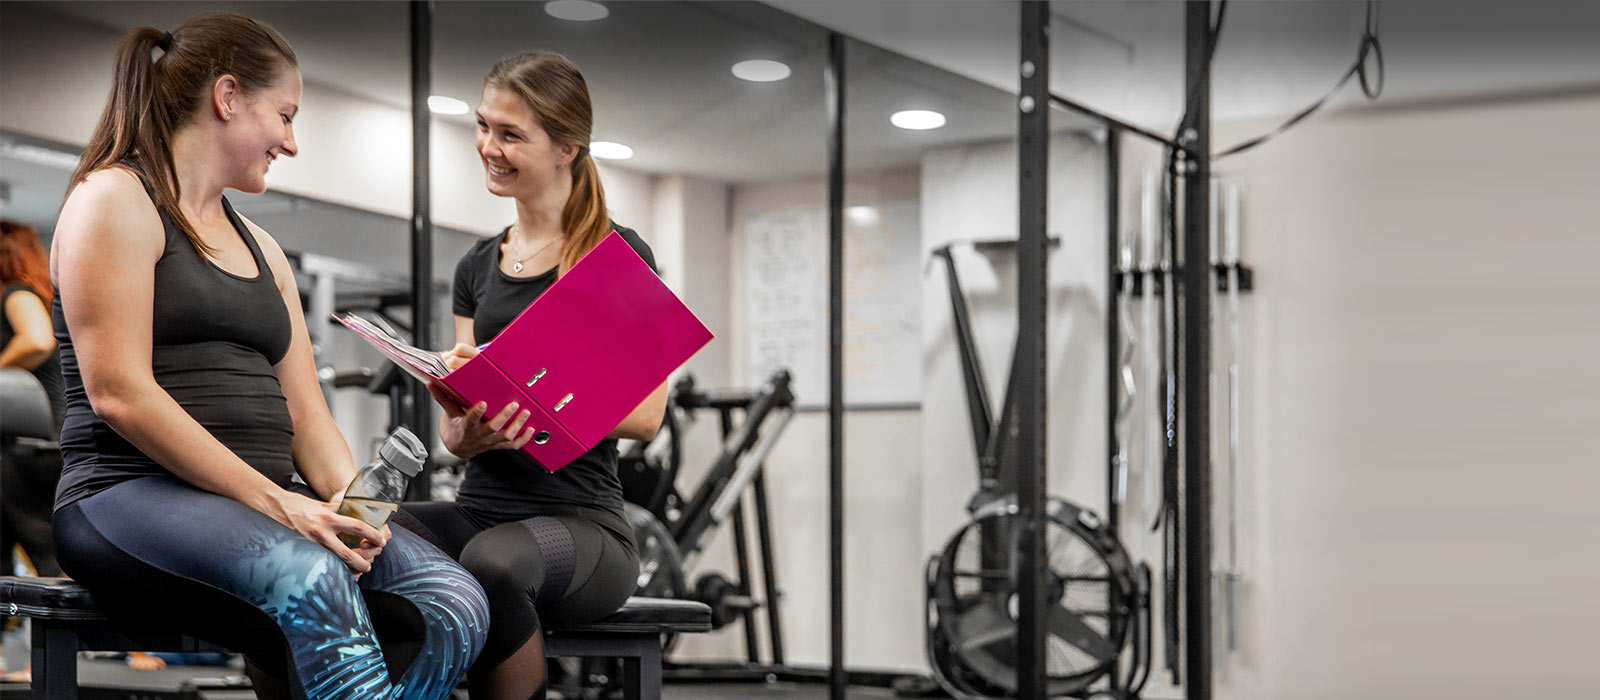 How To Be Respected As A Female Personal Trainer - Enterprise Fitness  Academy